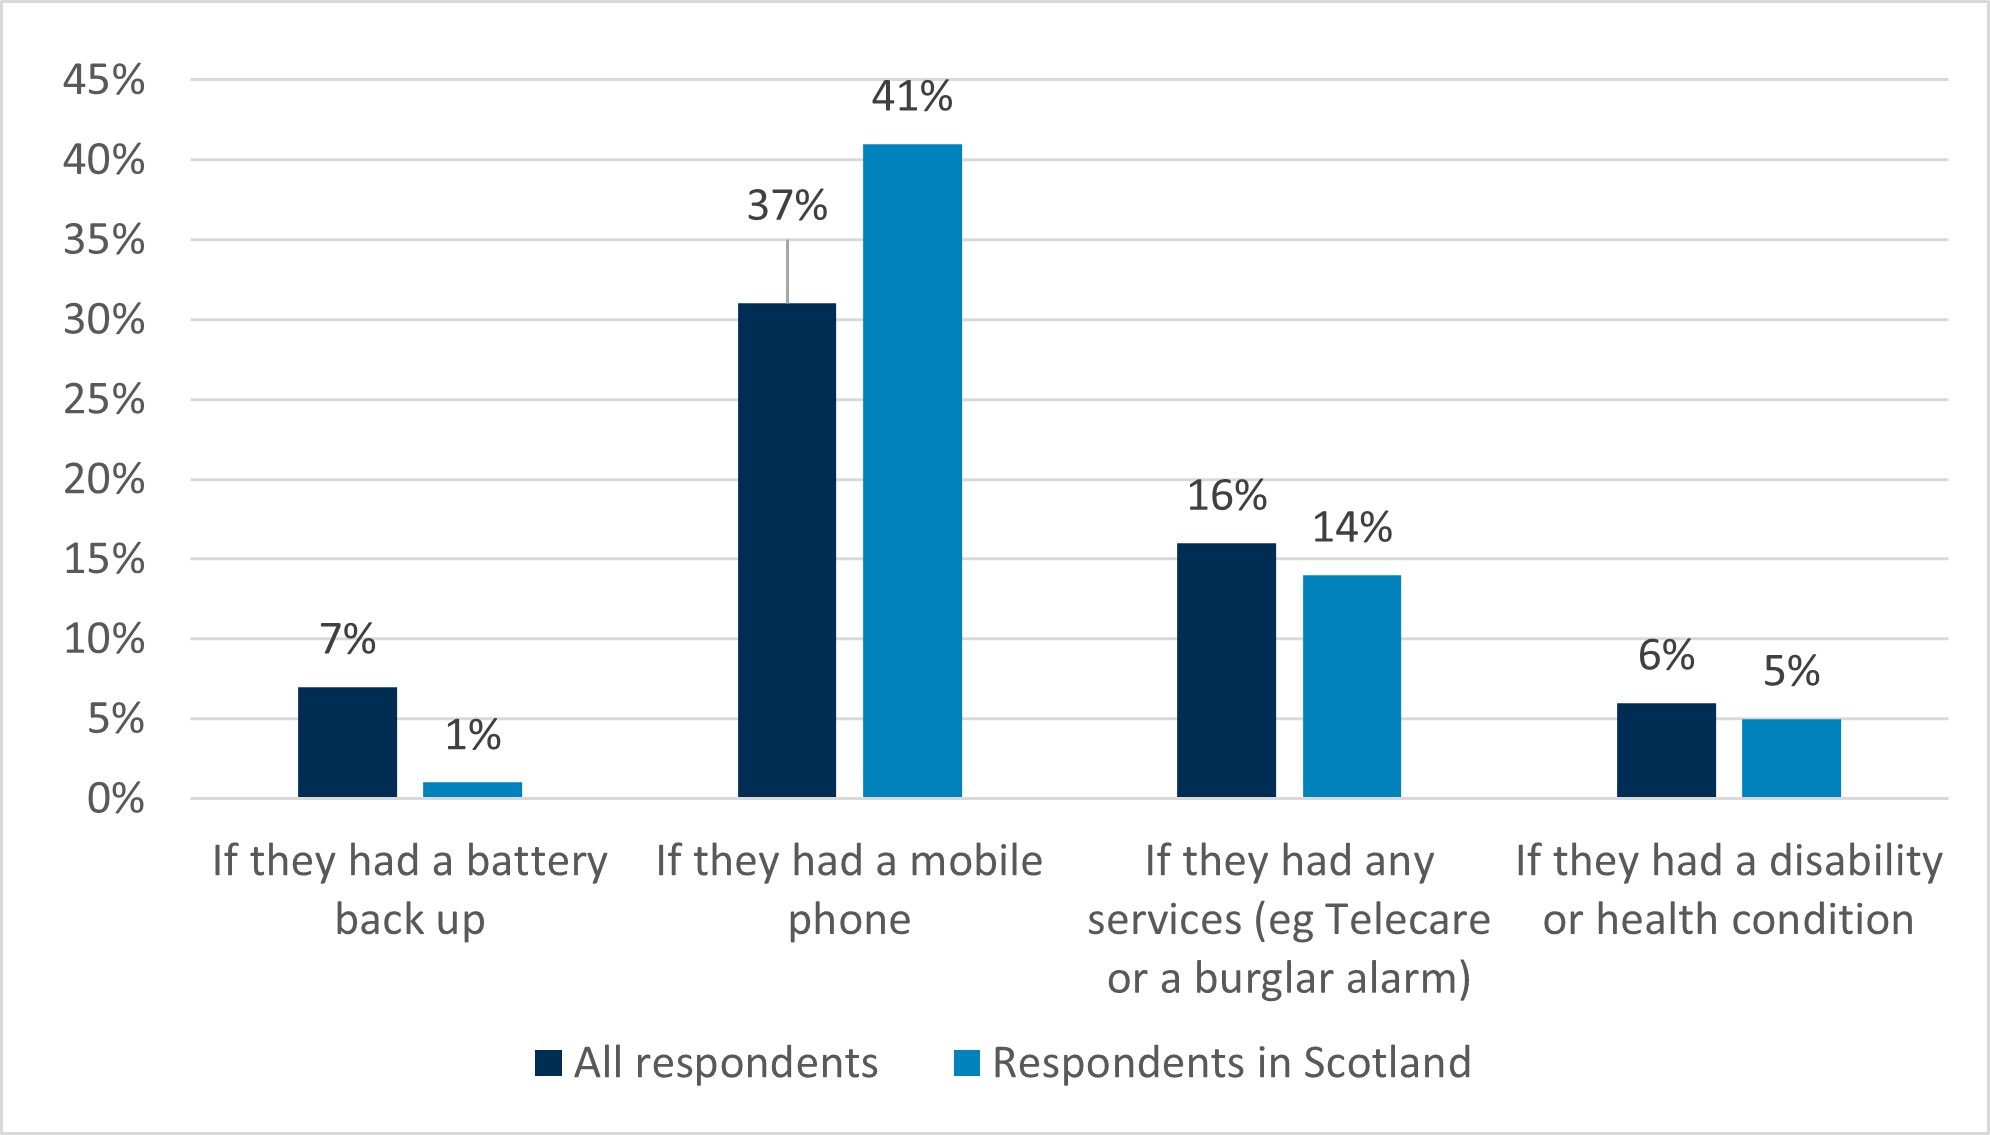 A bar chart showing responses to whether the respondents provider had asked them questions around potential vulnerabilities before transitioning them to VOIP. The chart shows the percentage of all respondents and respondents in Scotland who were asked if they had: a battery back up, a mobile phone, any services (for example Telecare of a burglar alarm) and any disabilities or health conditions.